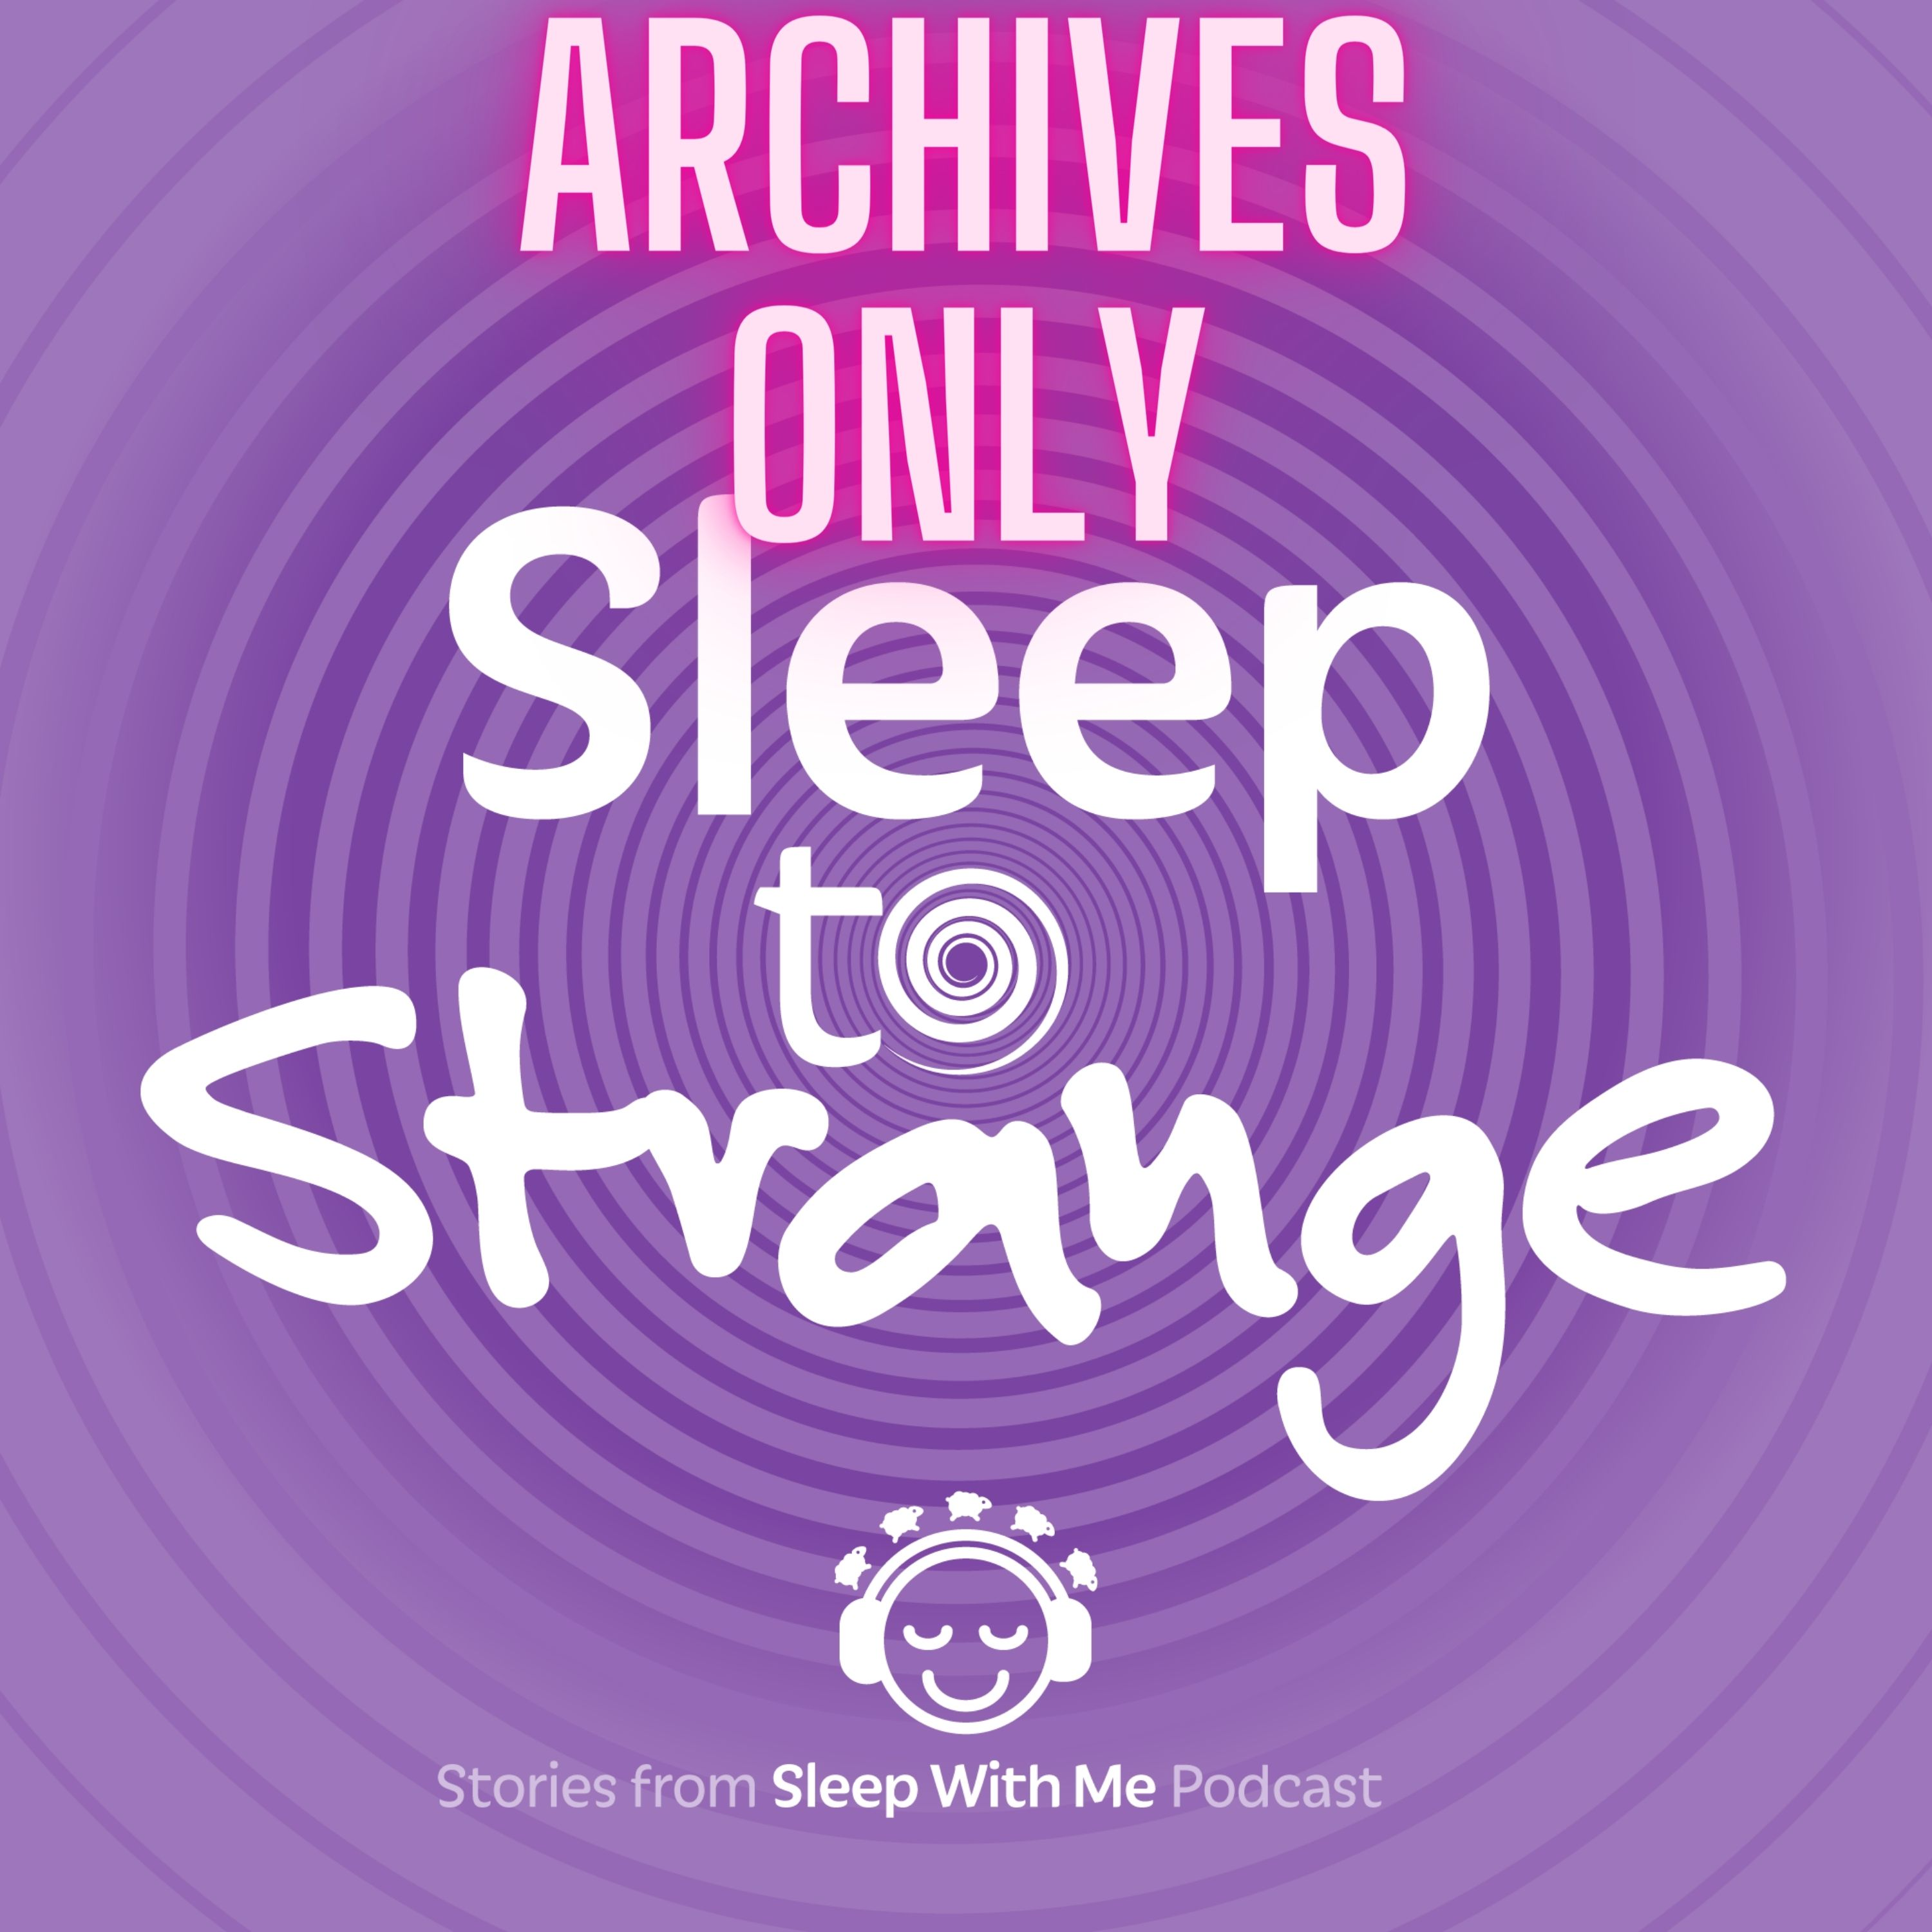 Sleep to Strange (Archives Only)